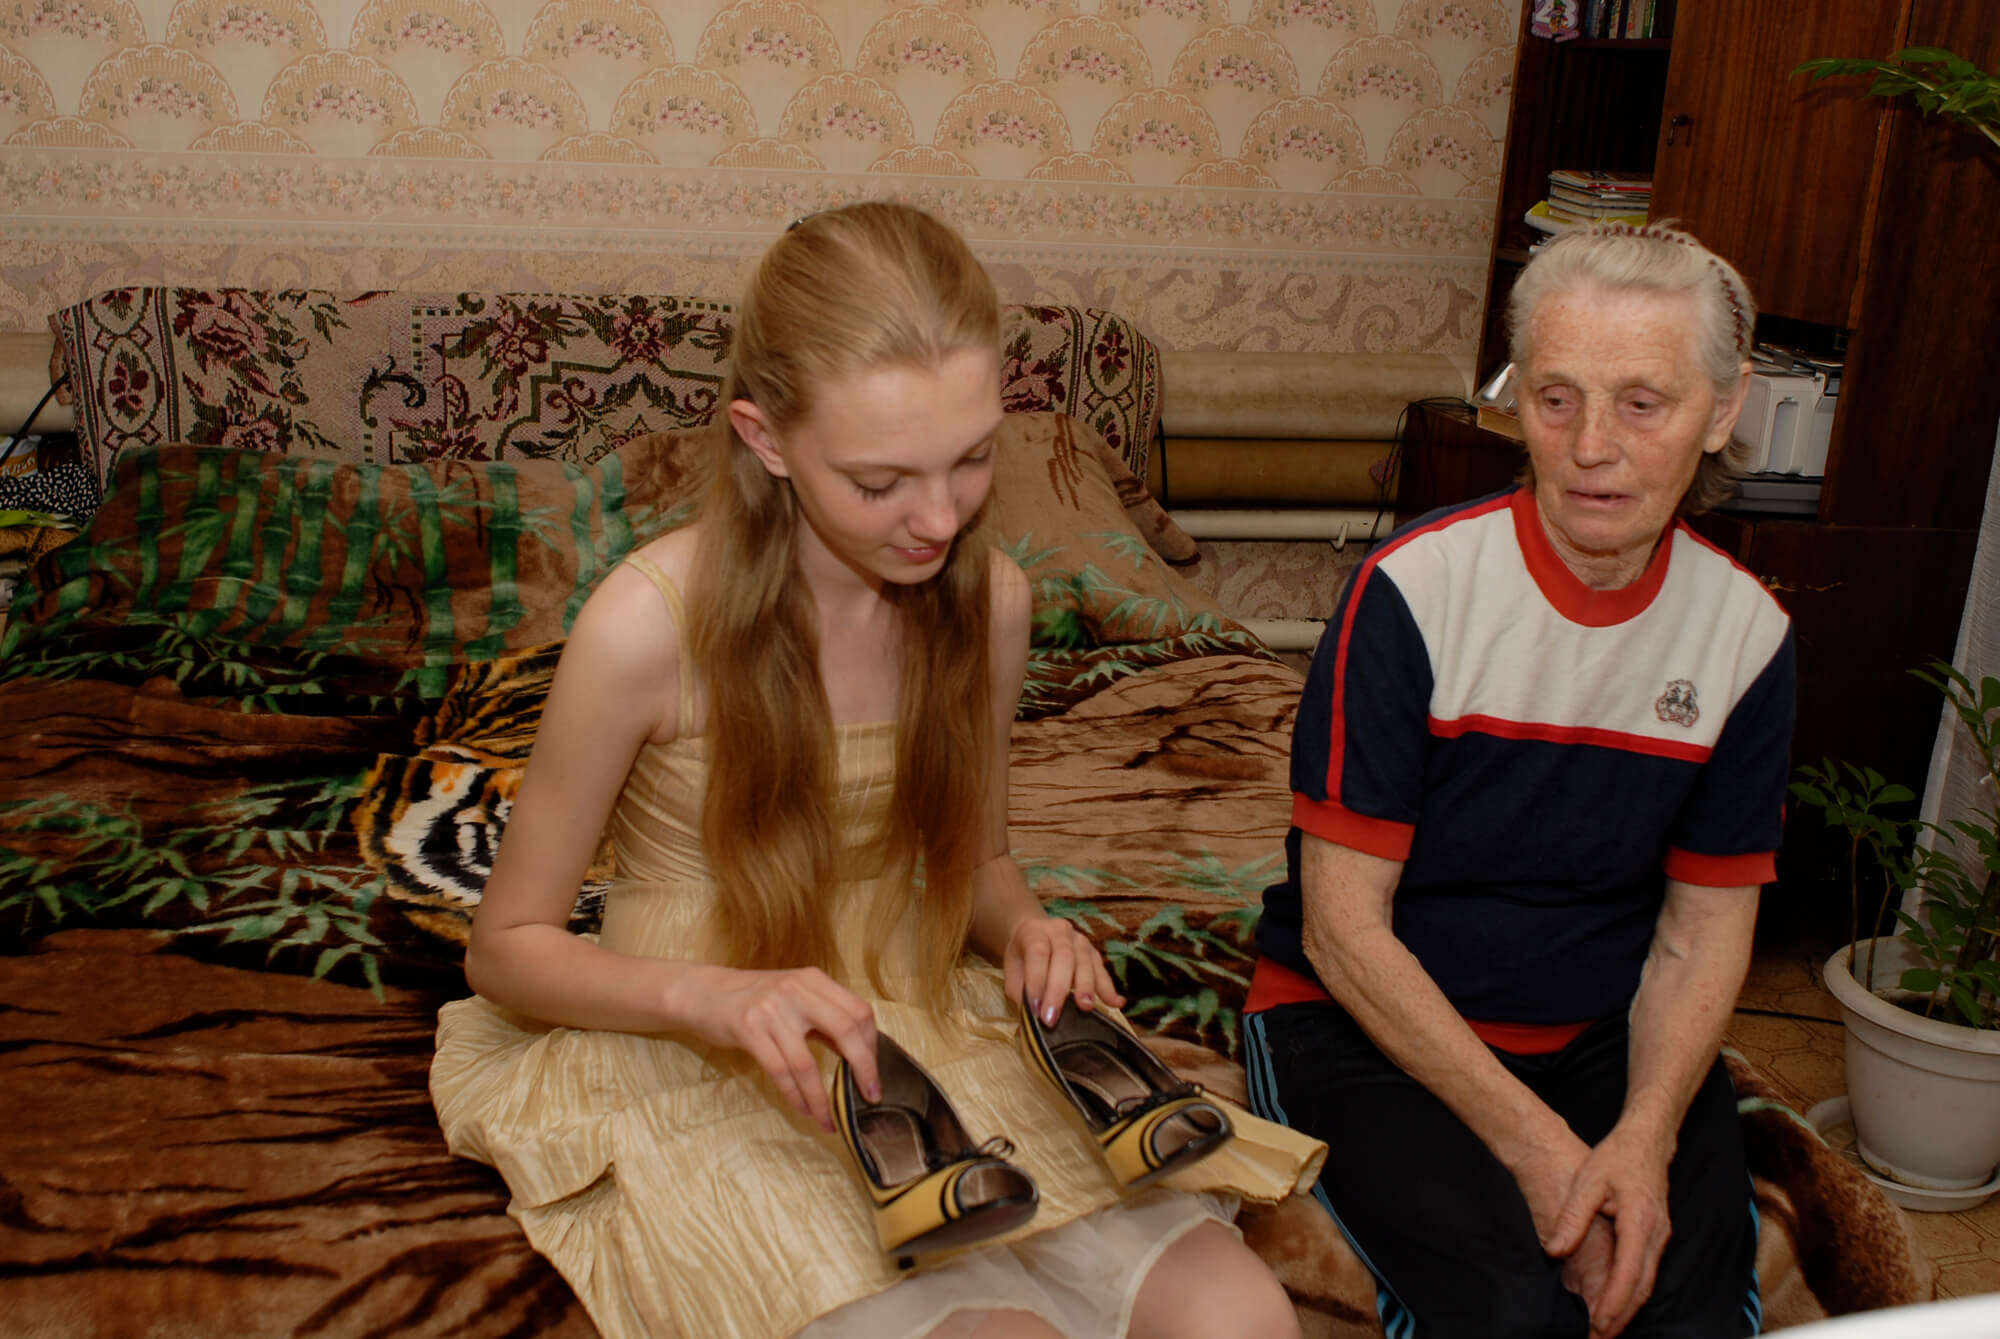 Still from Girl Model. A young girl with long blonde hair and wearing a light yellow dress, is looking at a pair of yellow and black heels that she is holding. She is sitting on a bed next to an elderly woman who is also looking at the shoes.